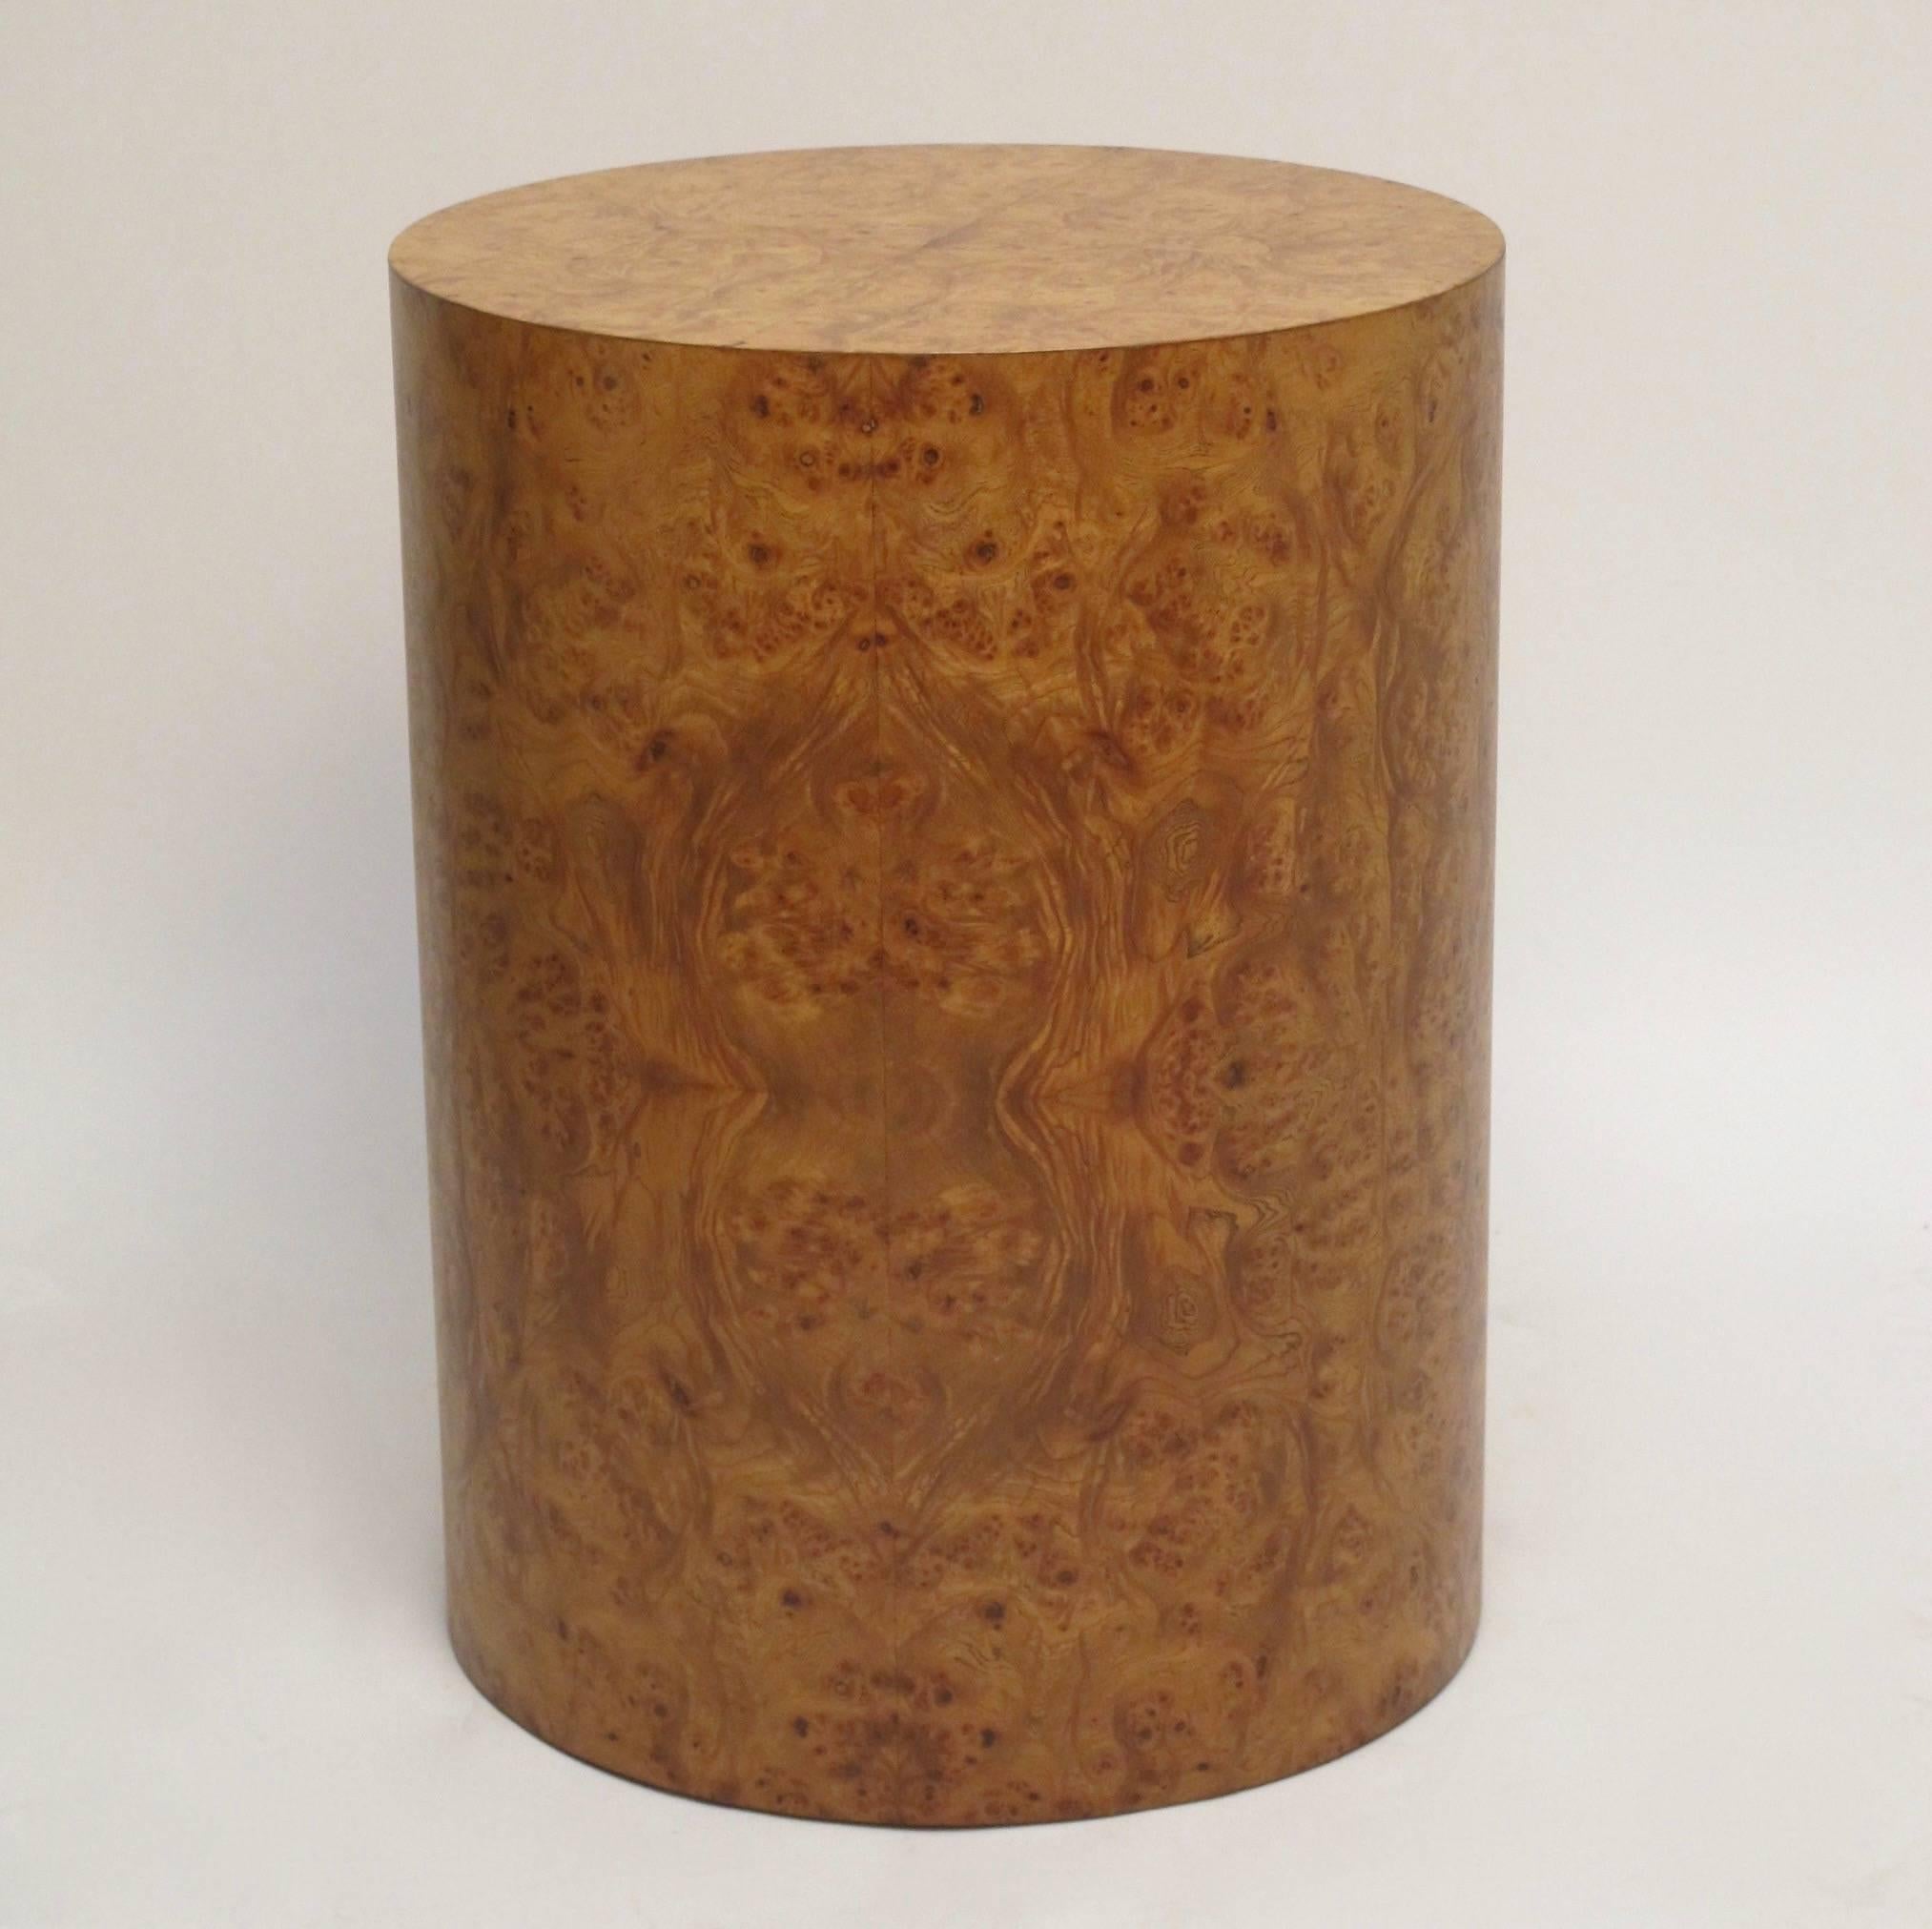 Pedestal or table base of bookmatched elmwood veneers. This pedestal will accommodate up to a 42 inch diameter glass top. Italy, circa 1960s.